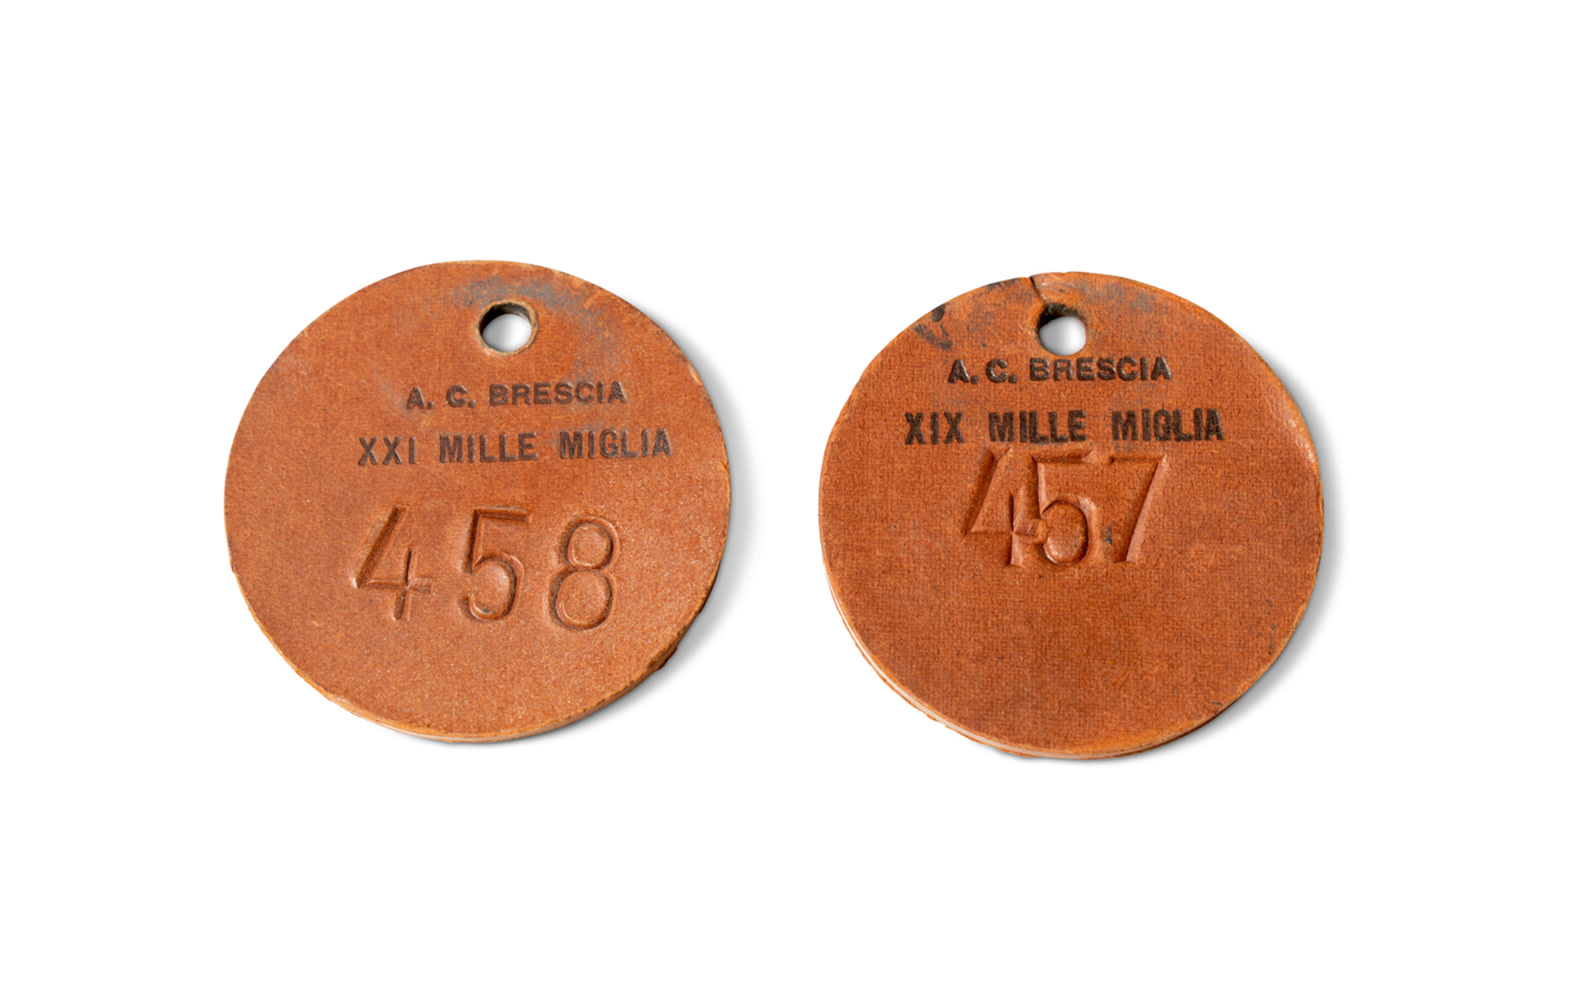 1952 and 1954 Mille Miglia Start Badges